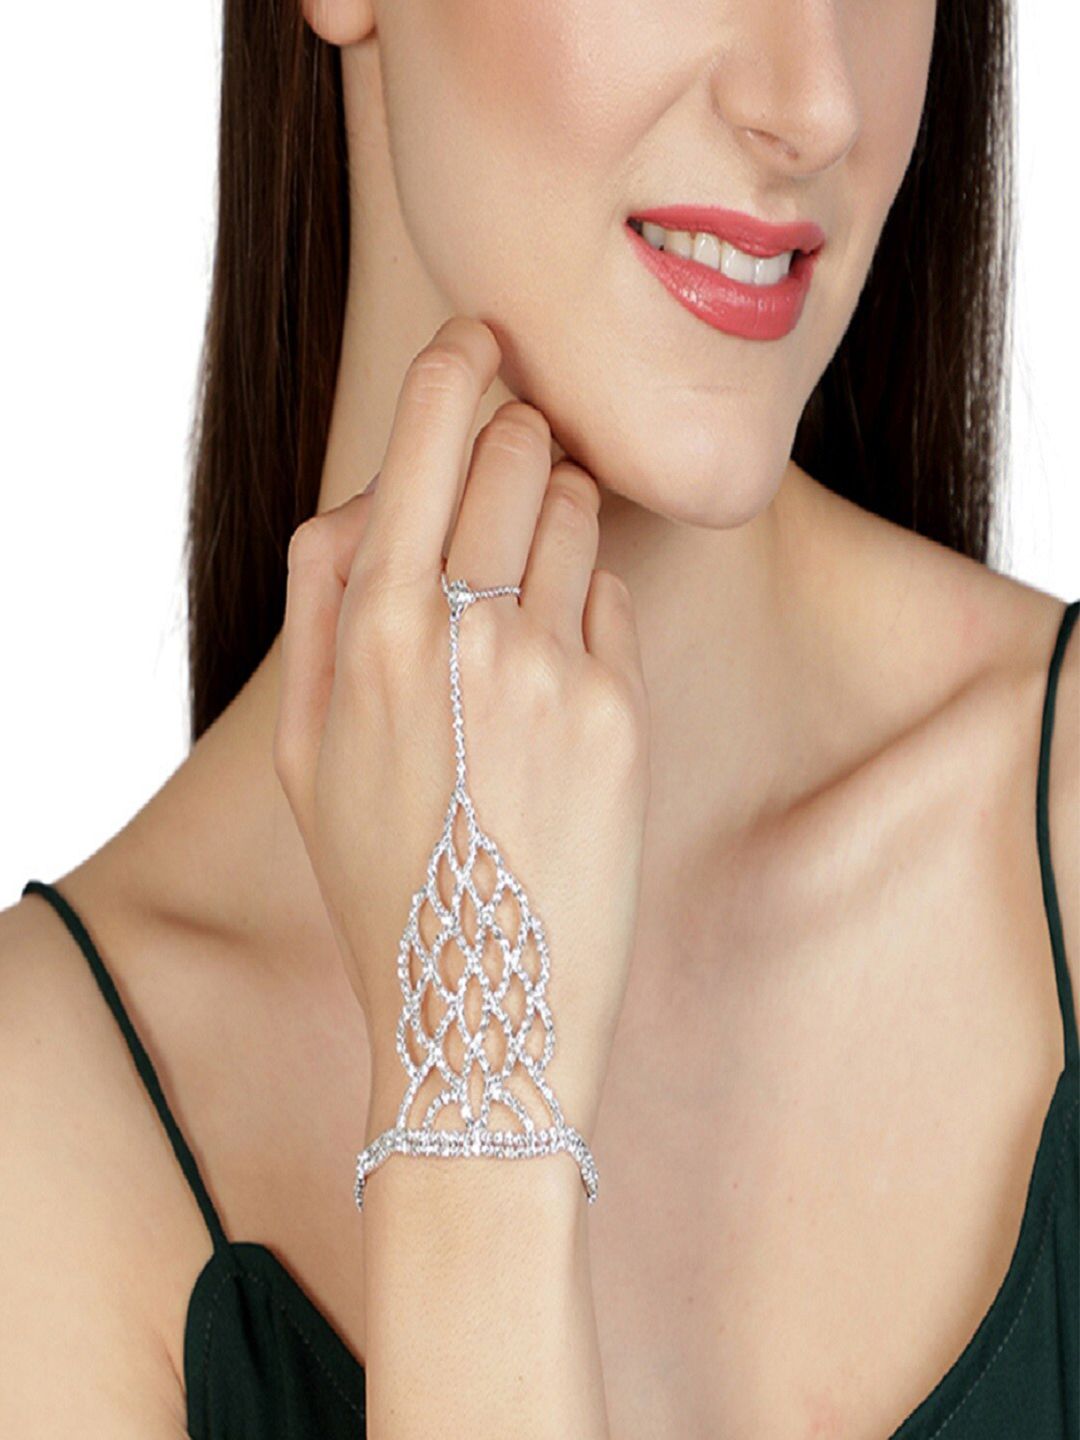 AQUASTREET Women Silver-Toned Silver-Plated Crystal Studded Ring Bracelet Price in India